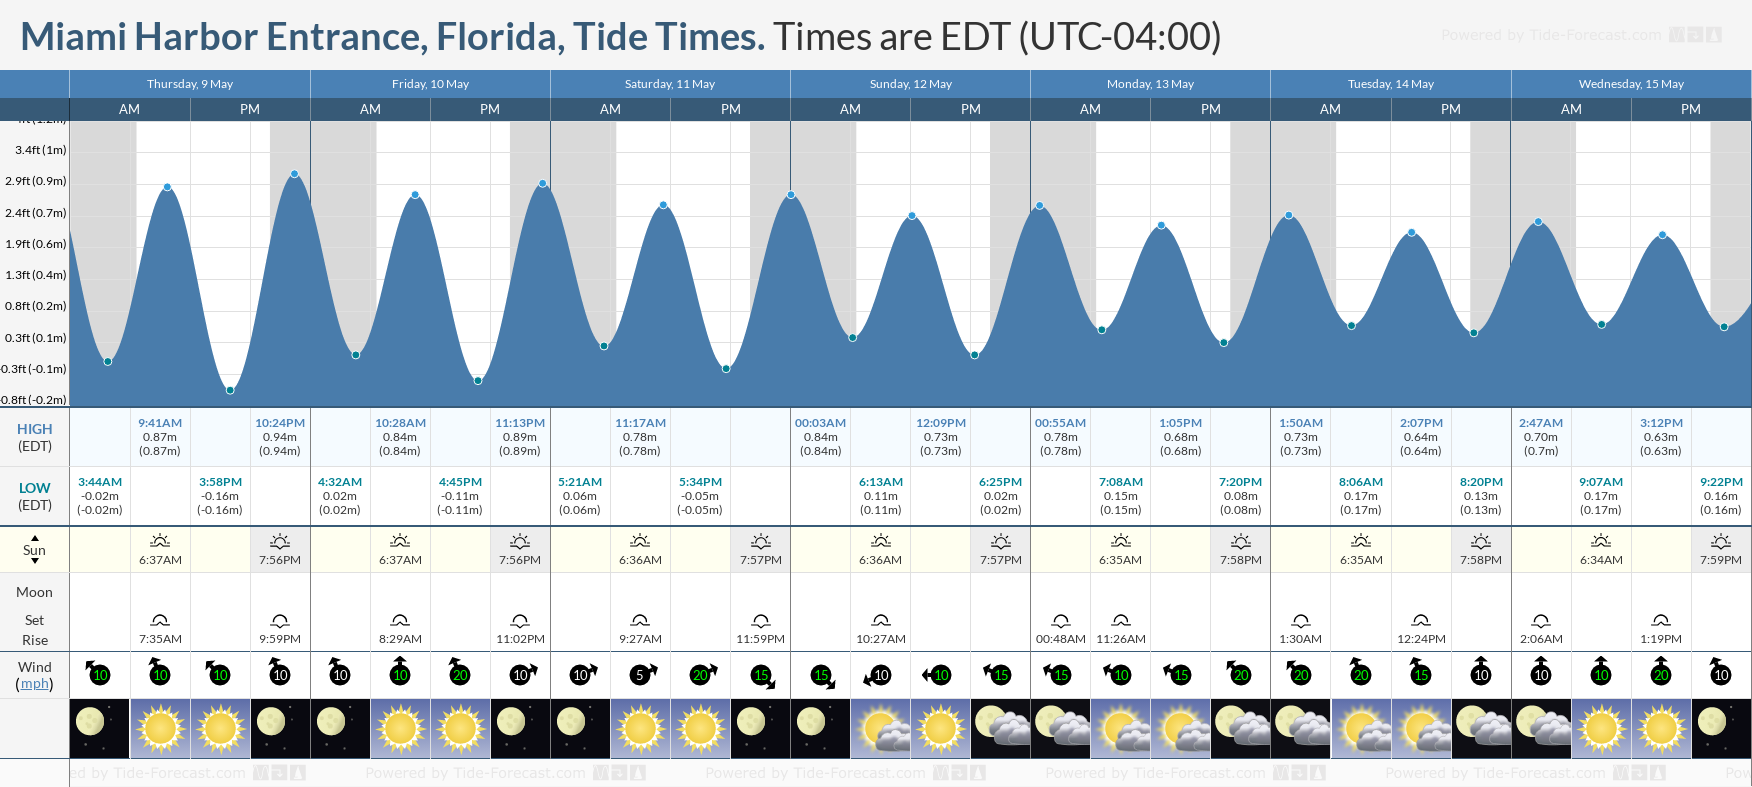 Miami Harbor Entrance, Florida Tide Chart including high and low tide times for the next 7 days